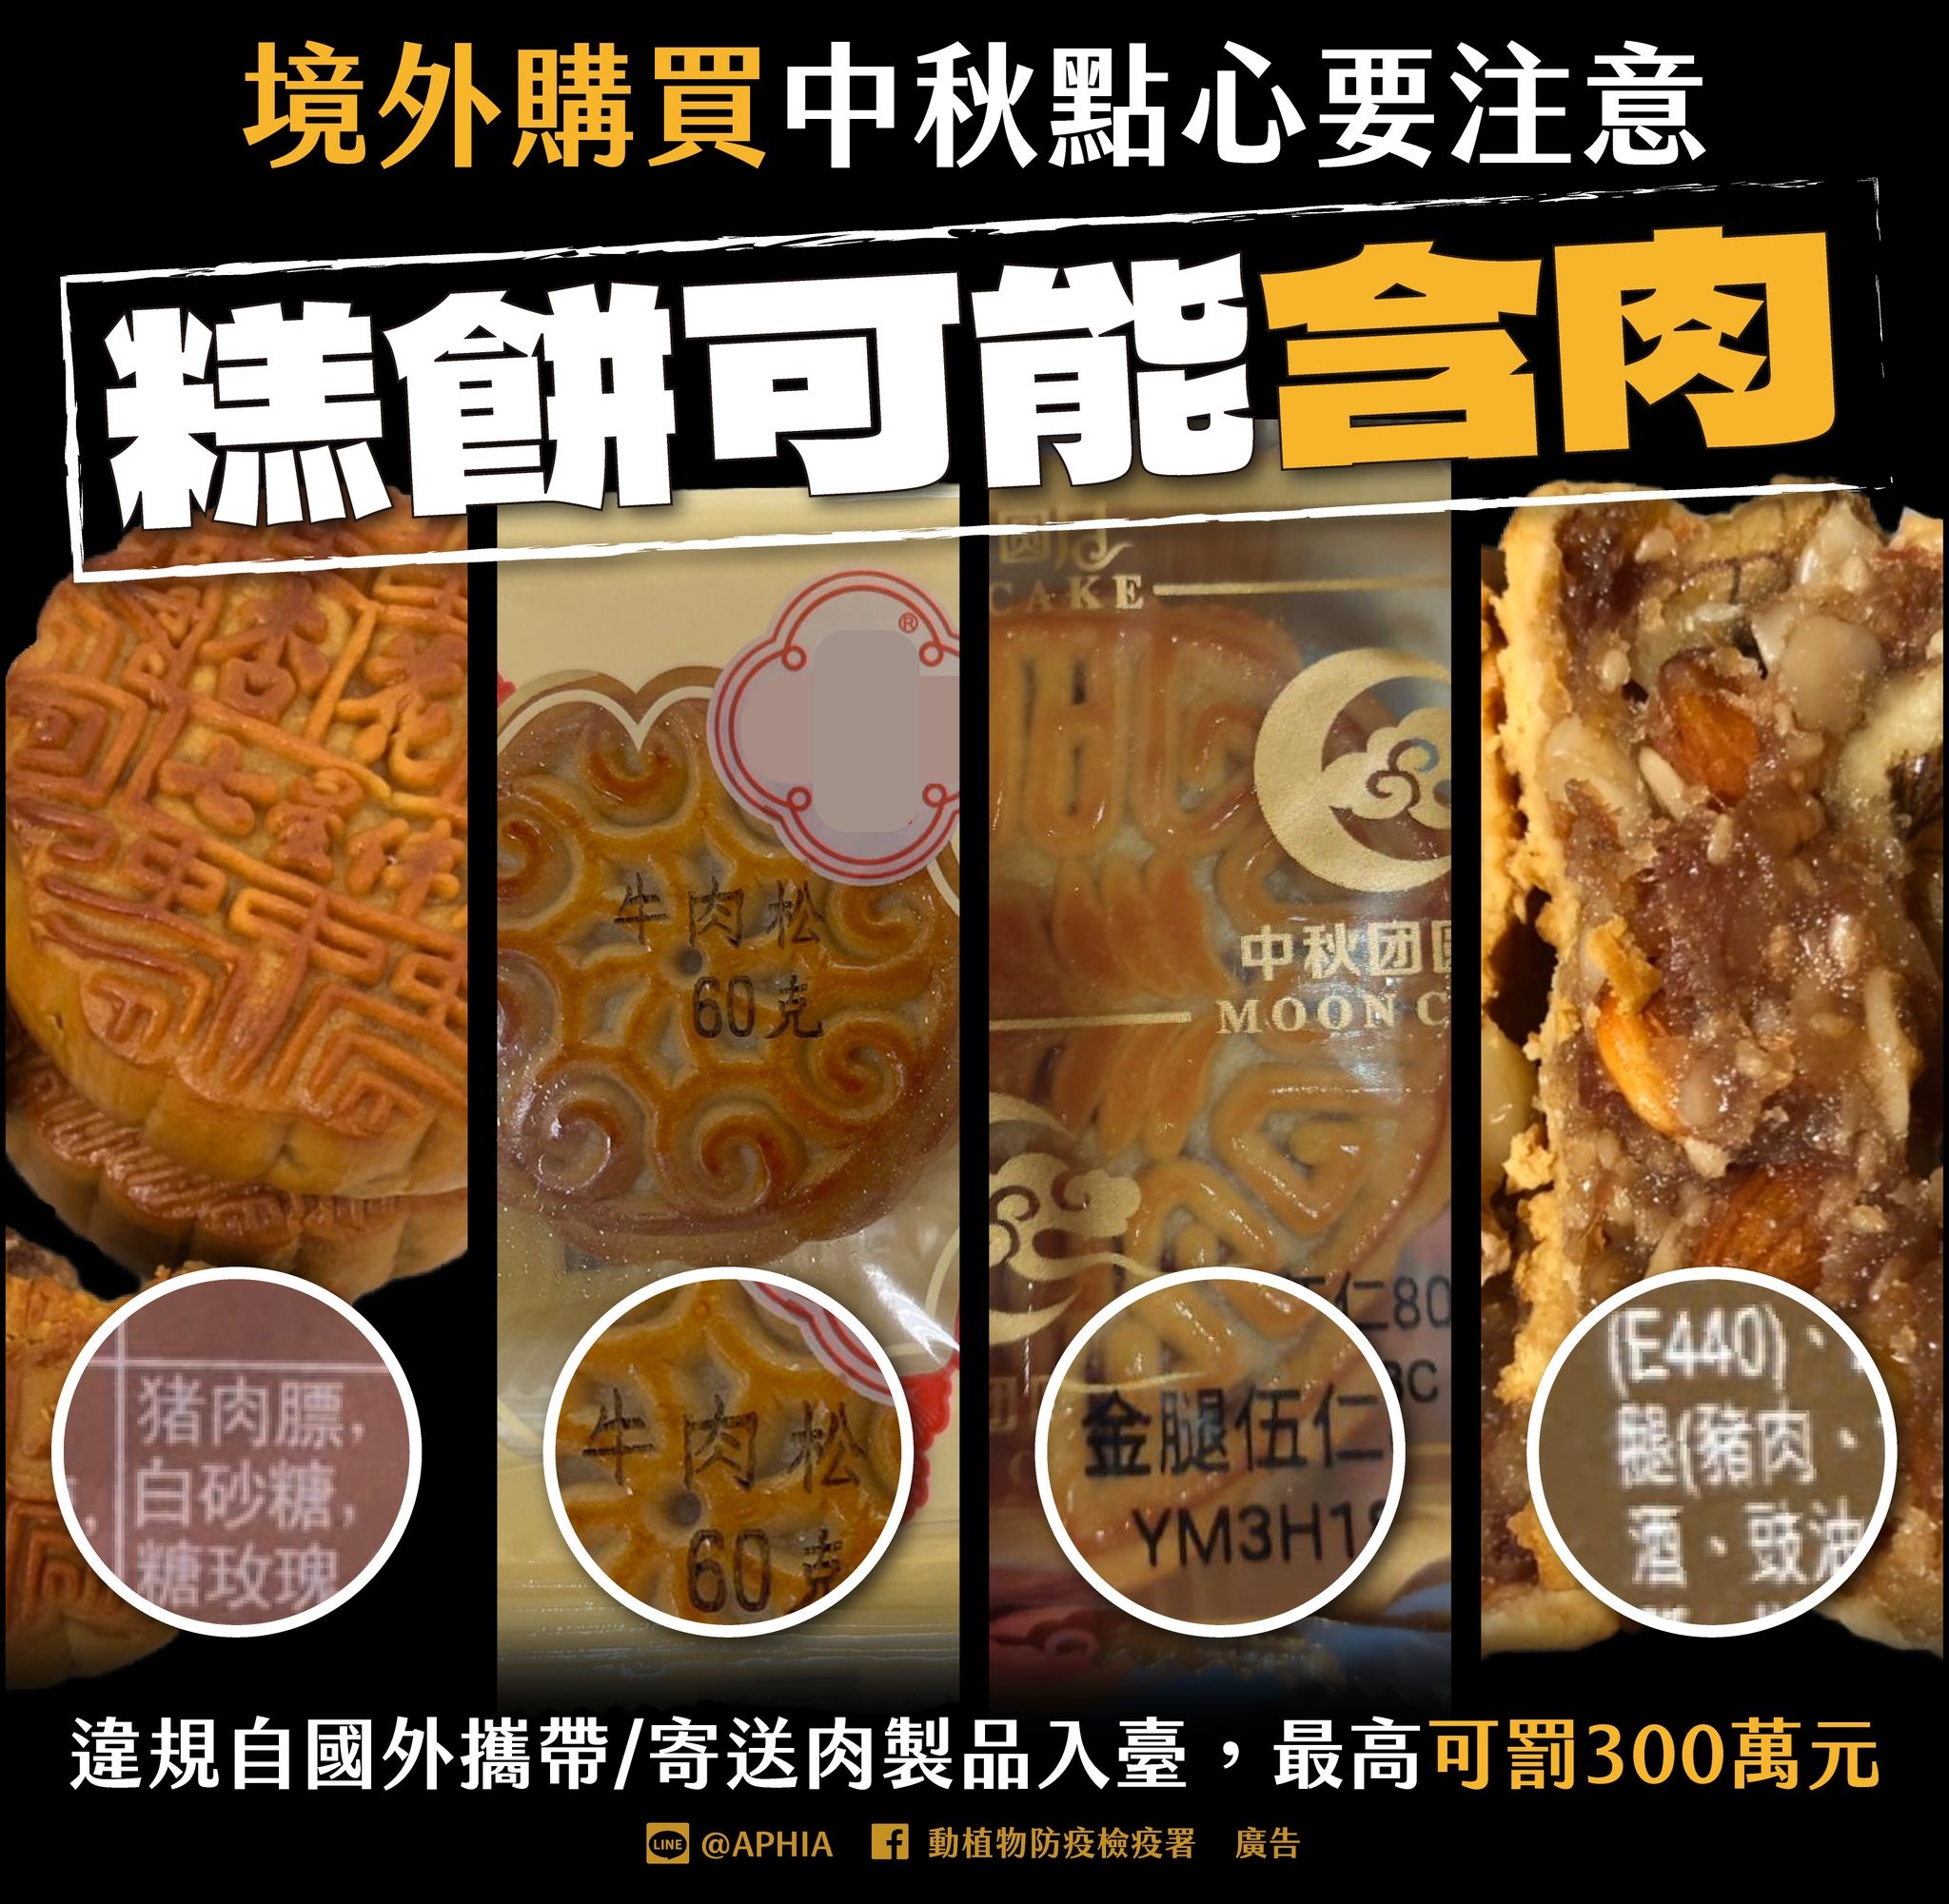 NIA cautions people not to ship mooncakes or anything containing pork during the Mid-Autumn Festival to prevent the spread of ASF.  Photo reproduced from the Bureau of Animal and Plant Health Inspection and Quarantine Facebook